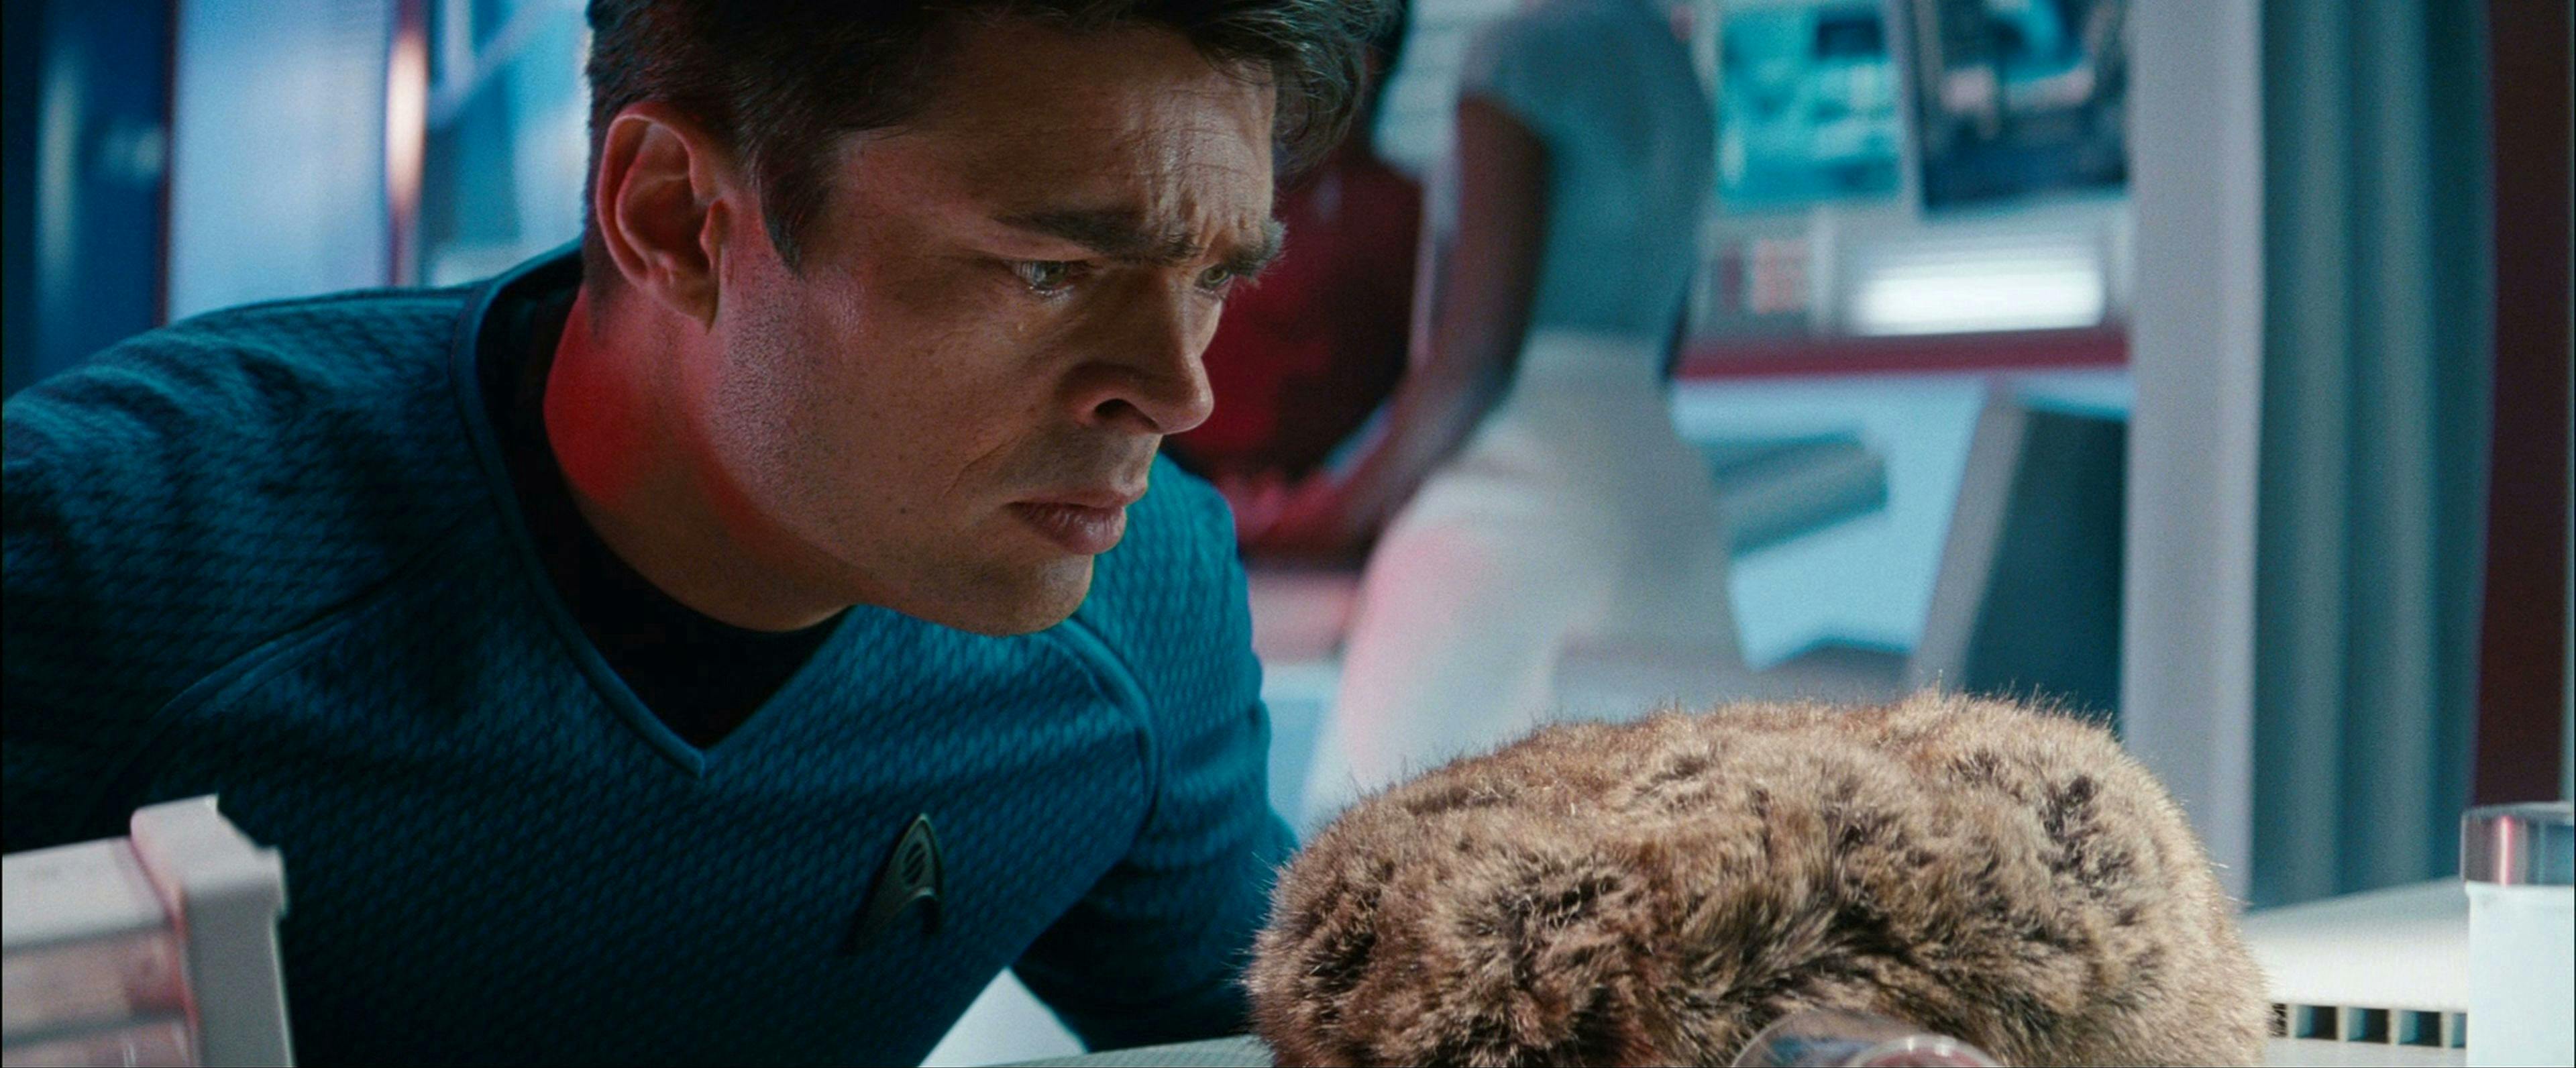 In Sickbay, a distressed Leonard McCoy looks up close-up at a Tribble in front of him in Star Trek Into Darkness